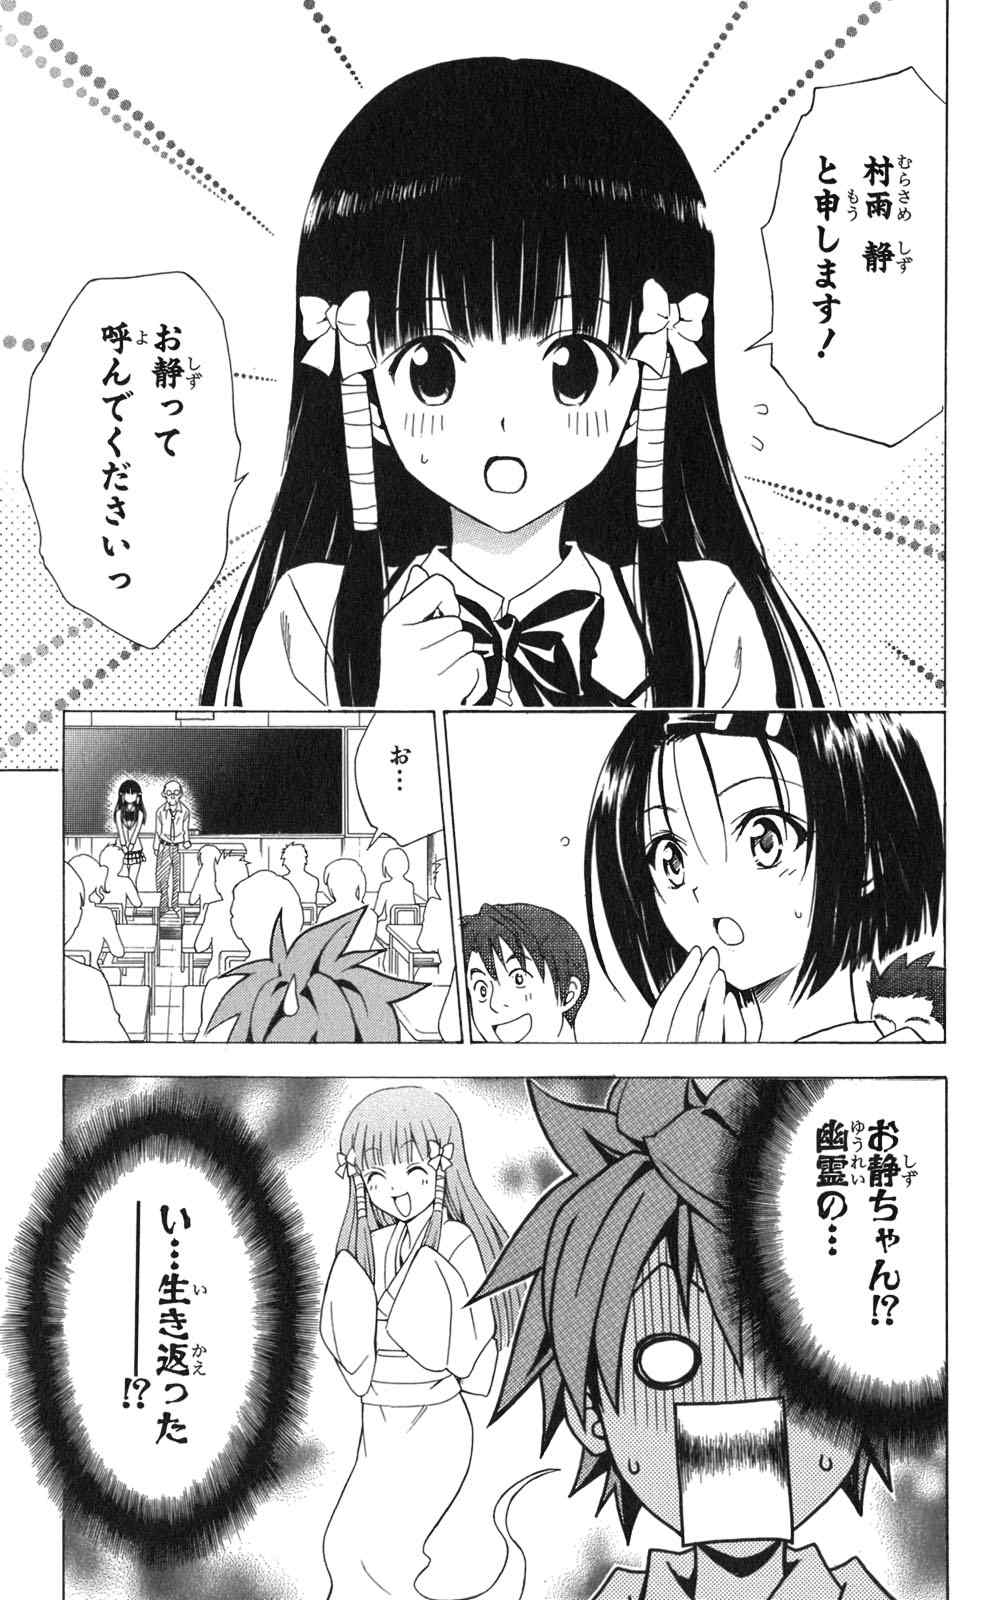 《To LOVEるとらぶる》漫画 To LOVE 11卷